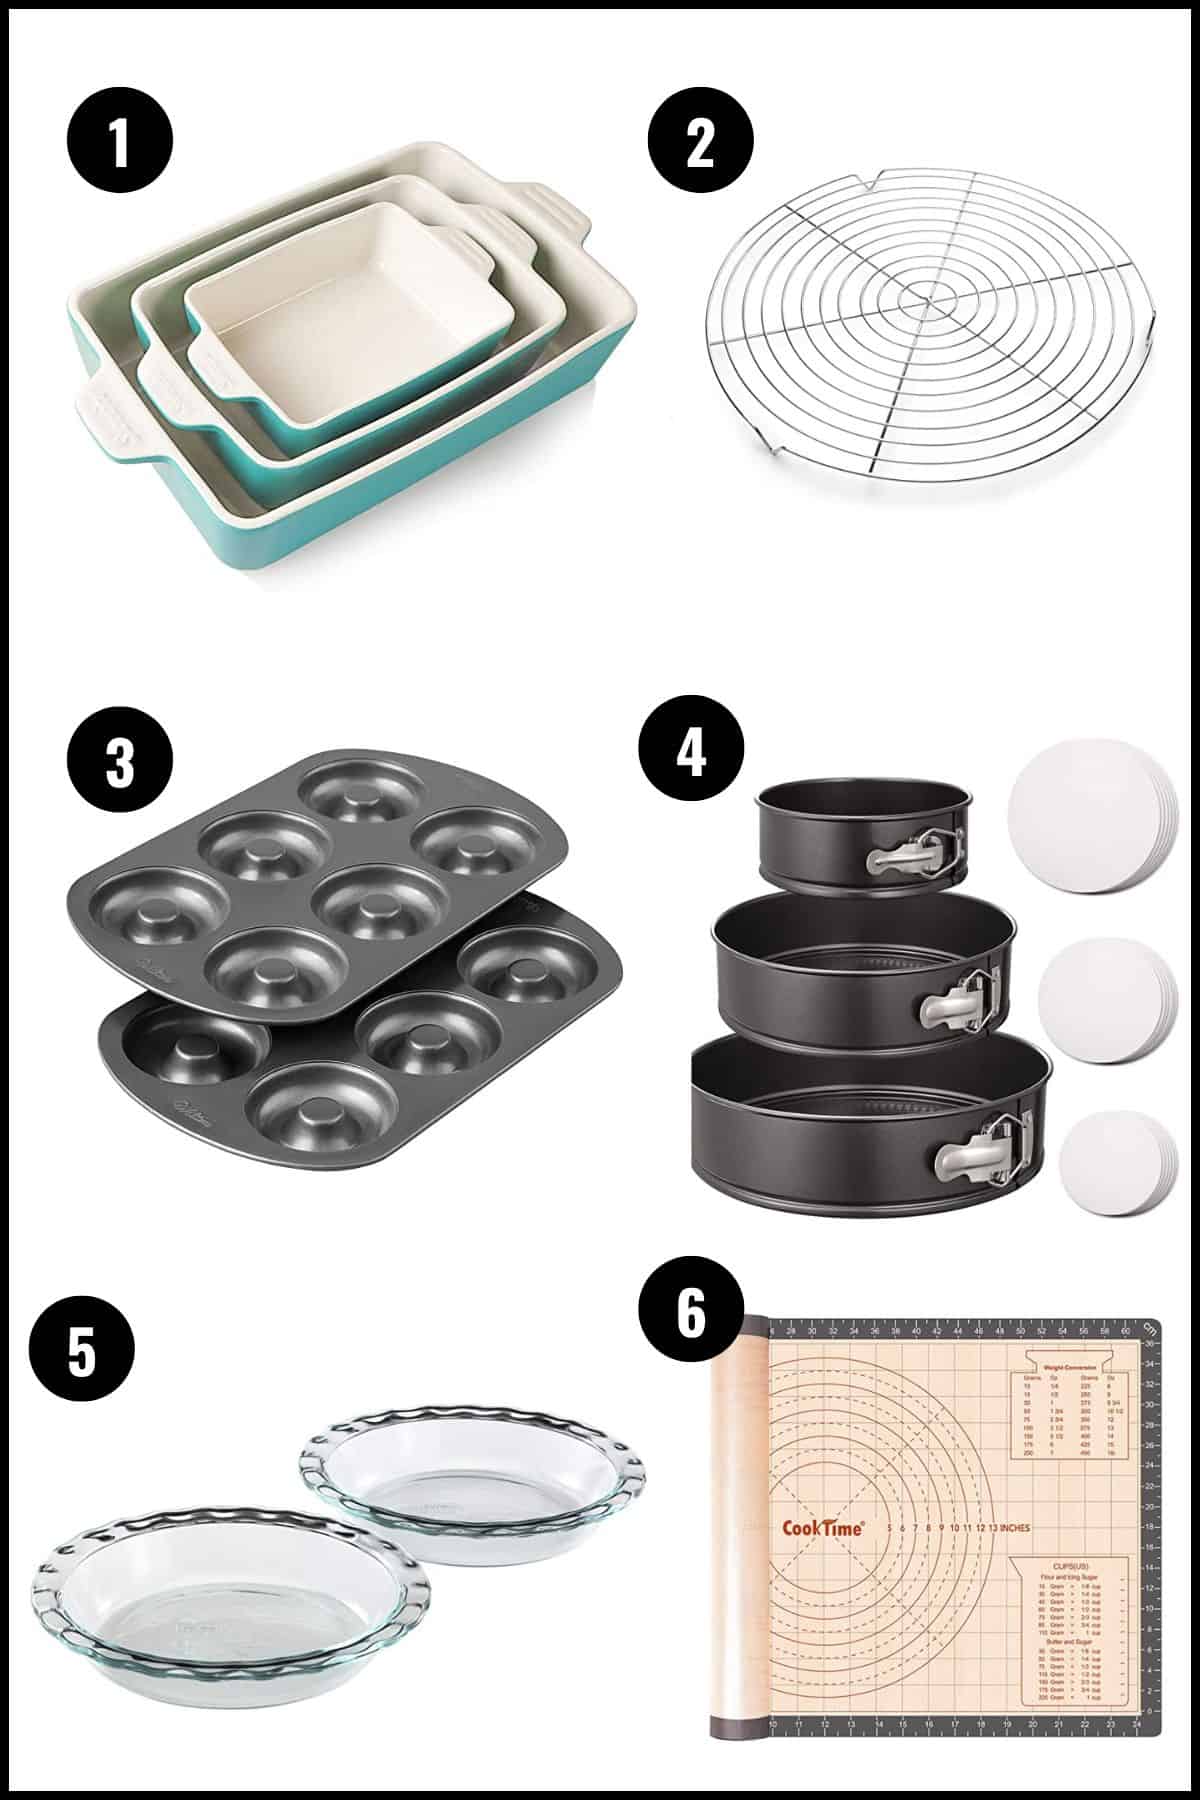 Graphic showing baking tools with associated numbers.